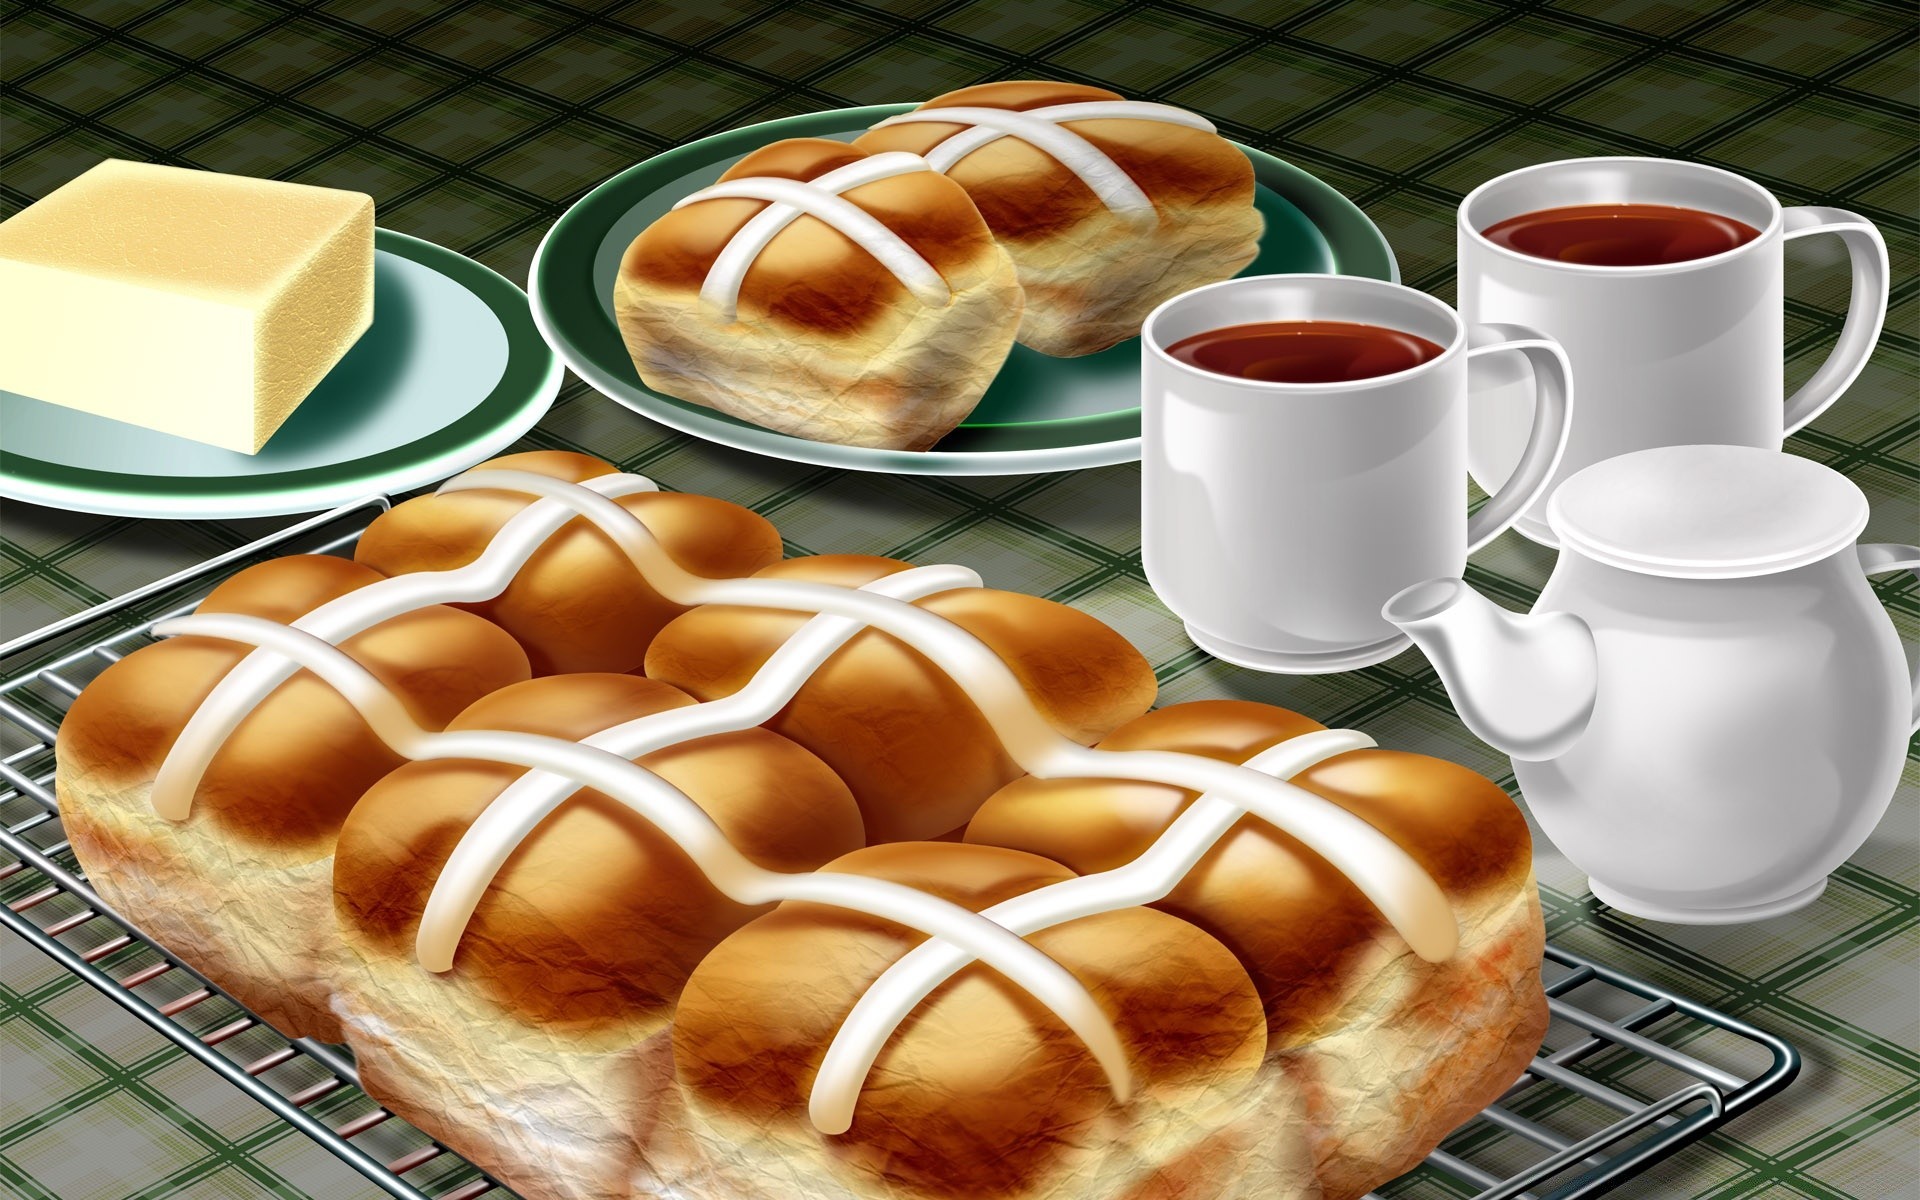 easter food breakfast bread pastry bakery coffee cup sweet hot delicious refreshment traditional plate tea cake table homemade meal dawn